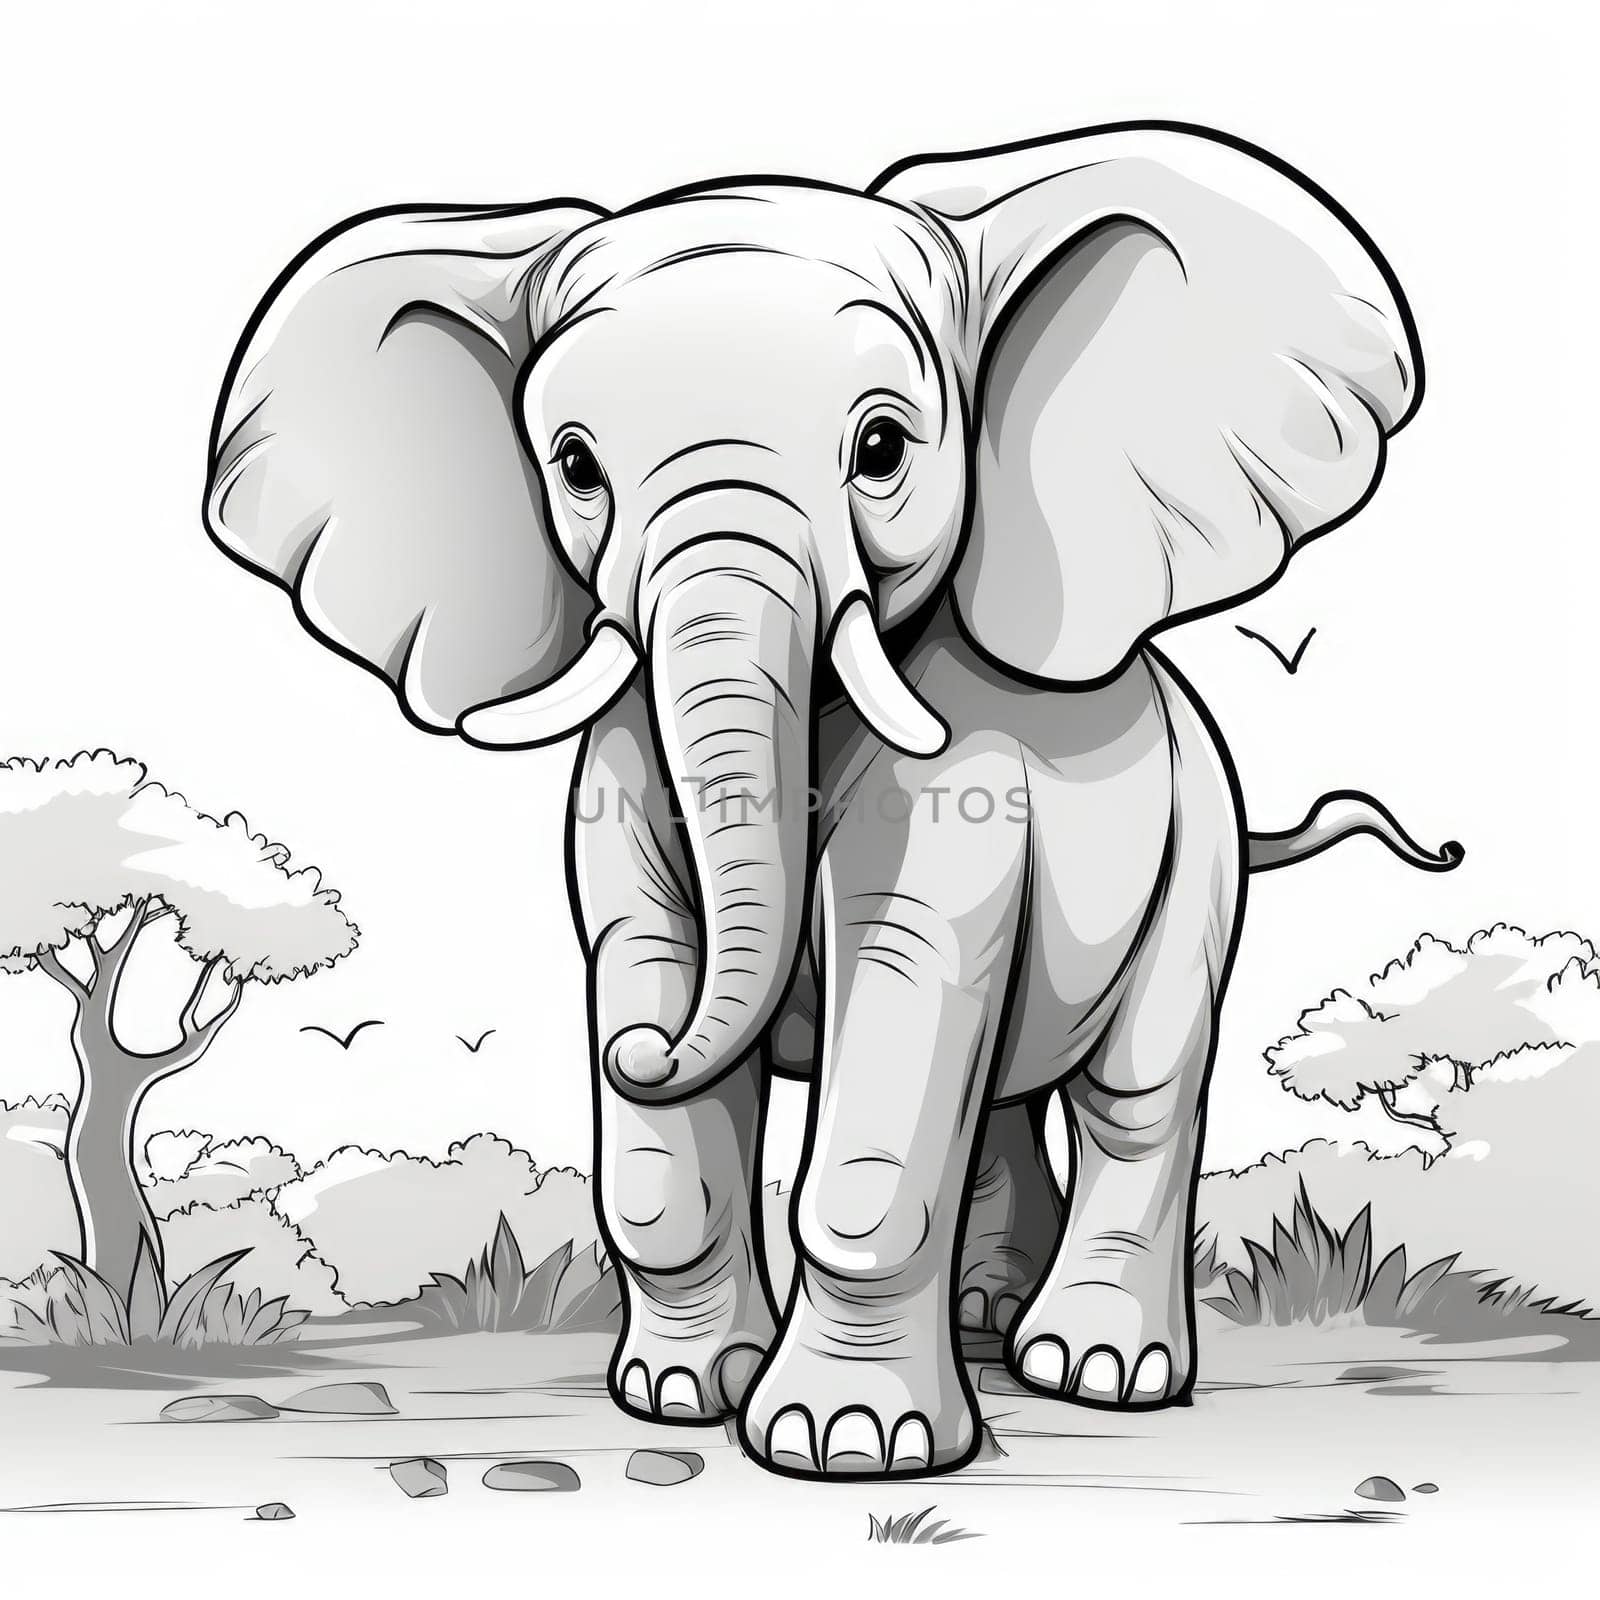 Majestic Elephant Illustration in African Savanna, page coloring book for children